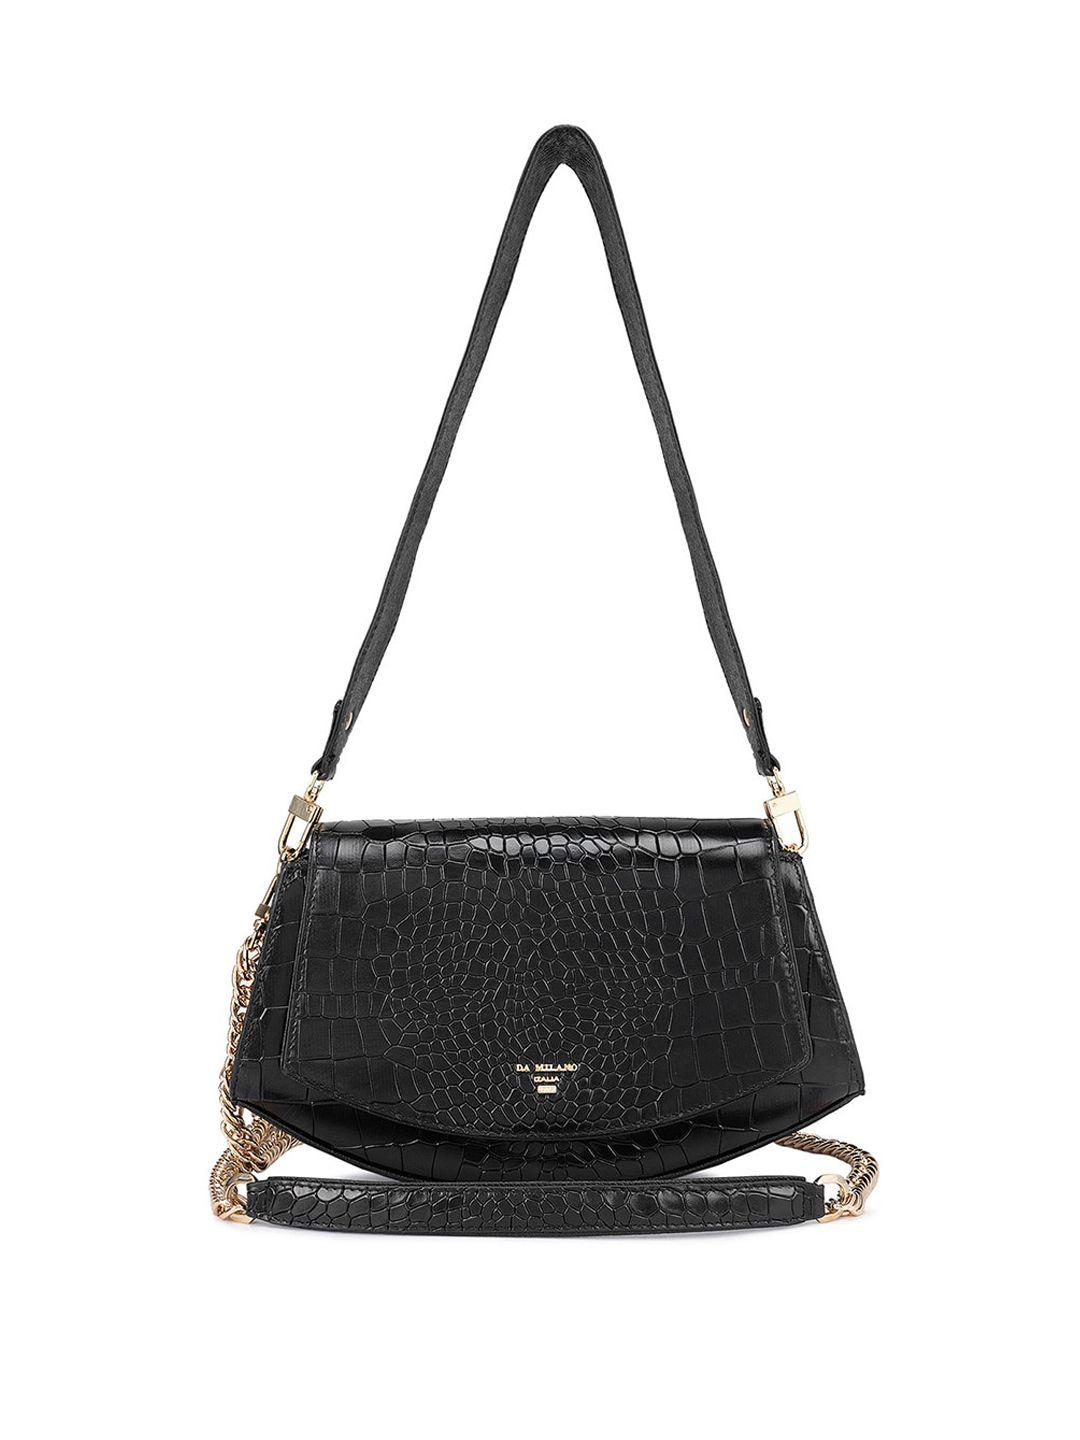 da milano animal textured leather structured sling bag